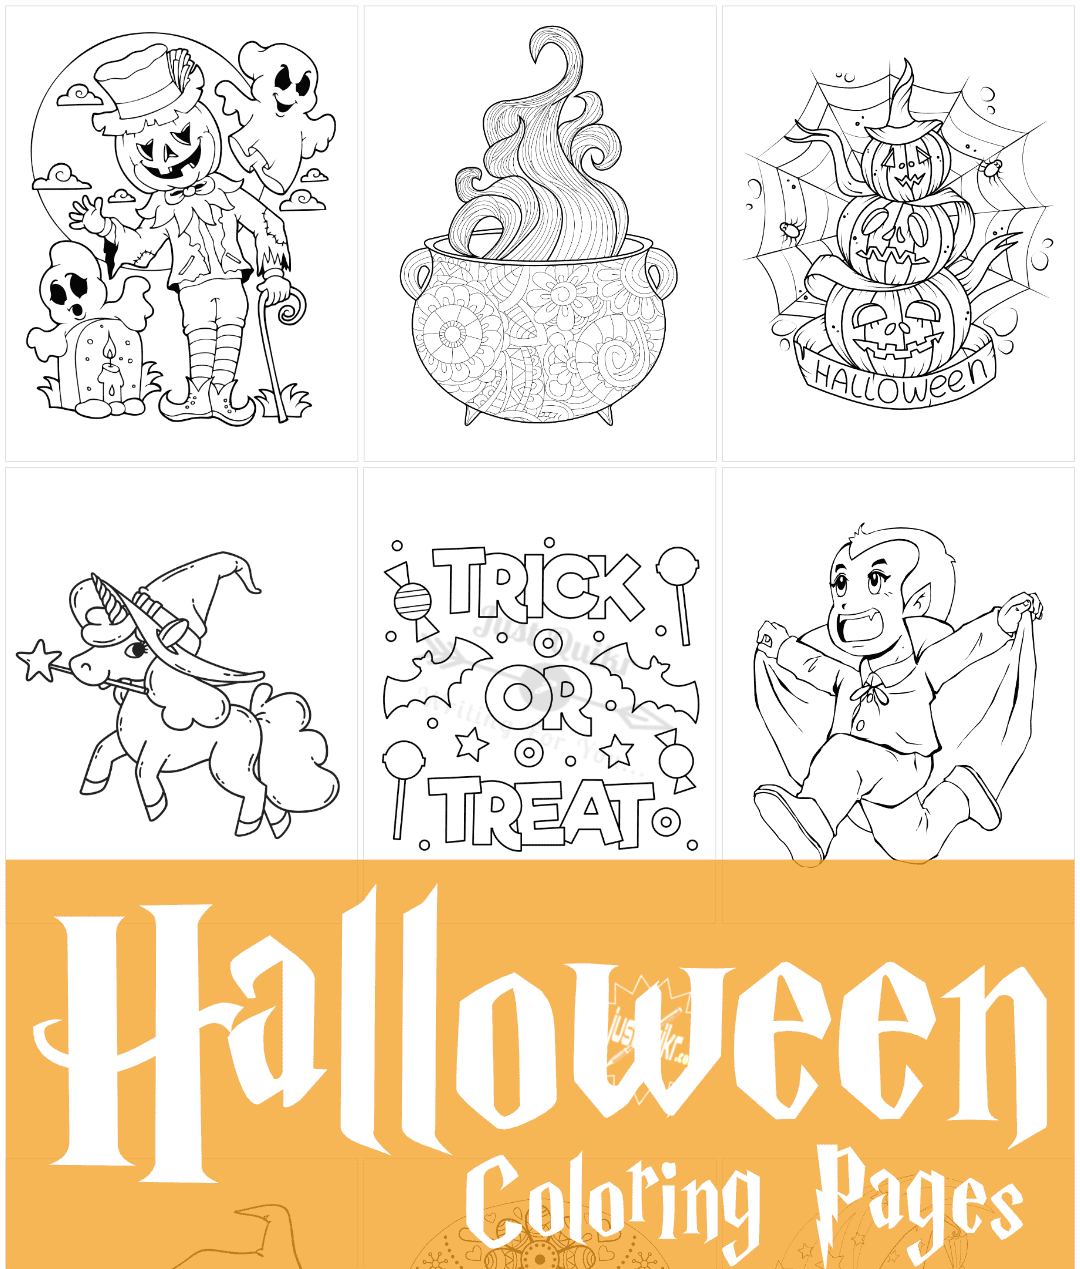 Halloween Day Celebration Drawings Pictures Images free Download